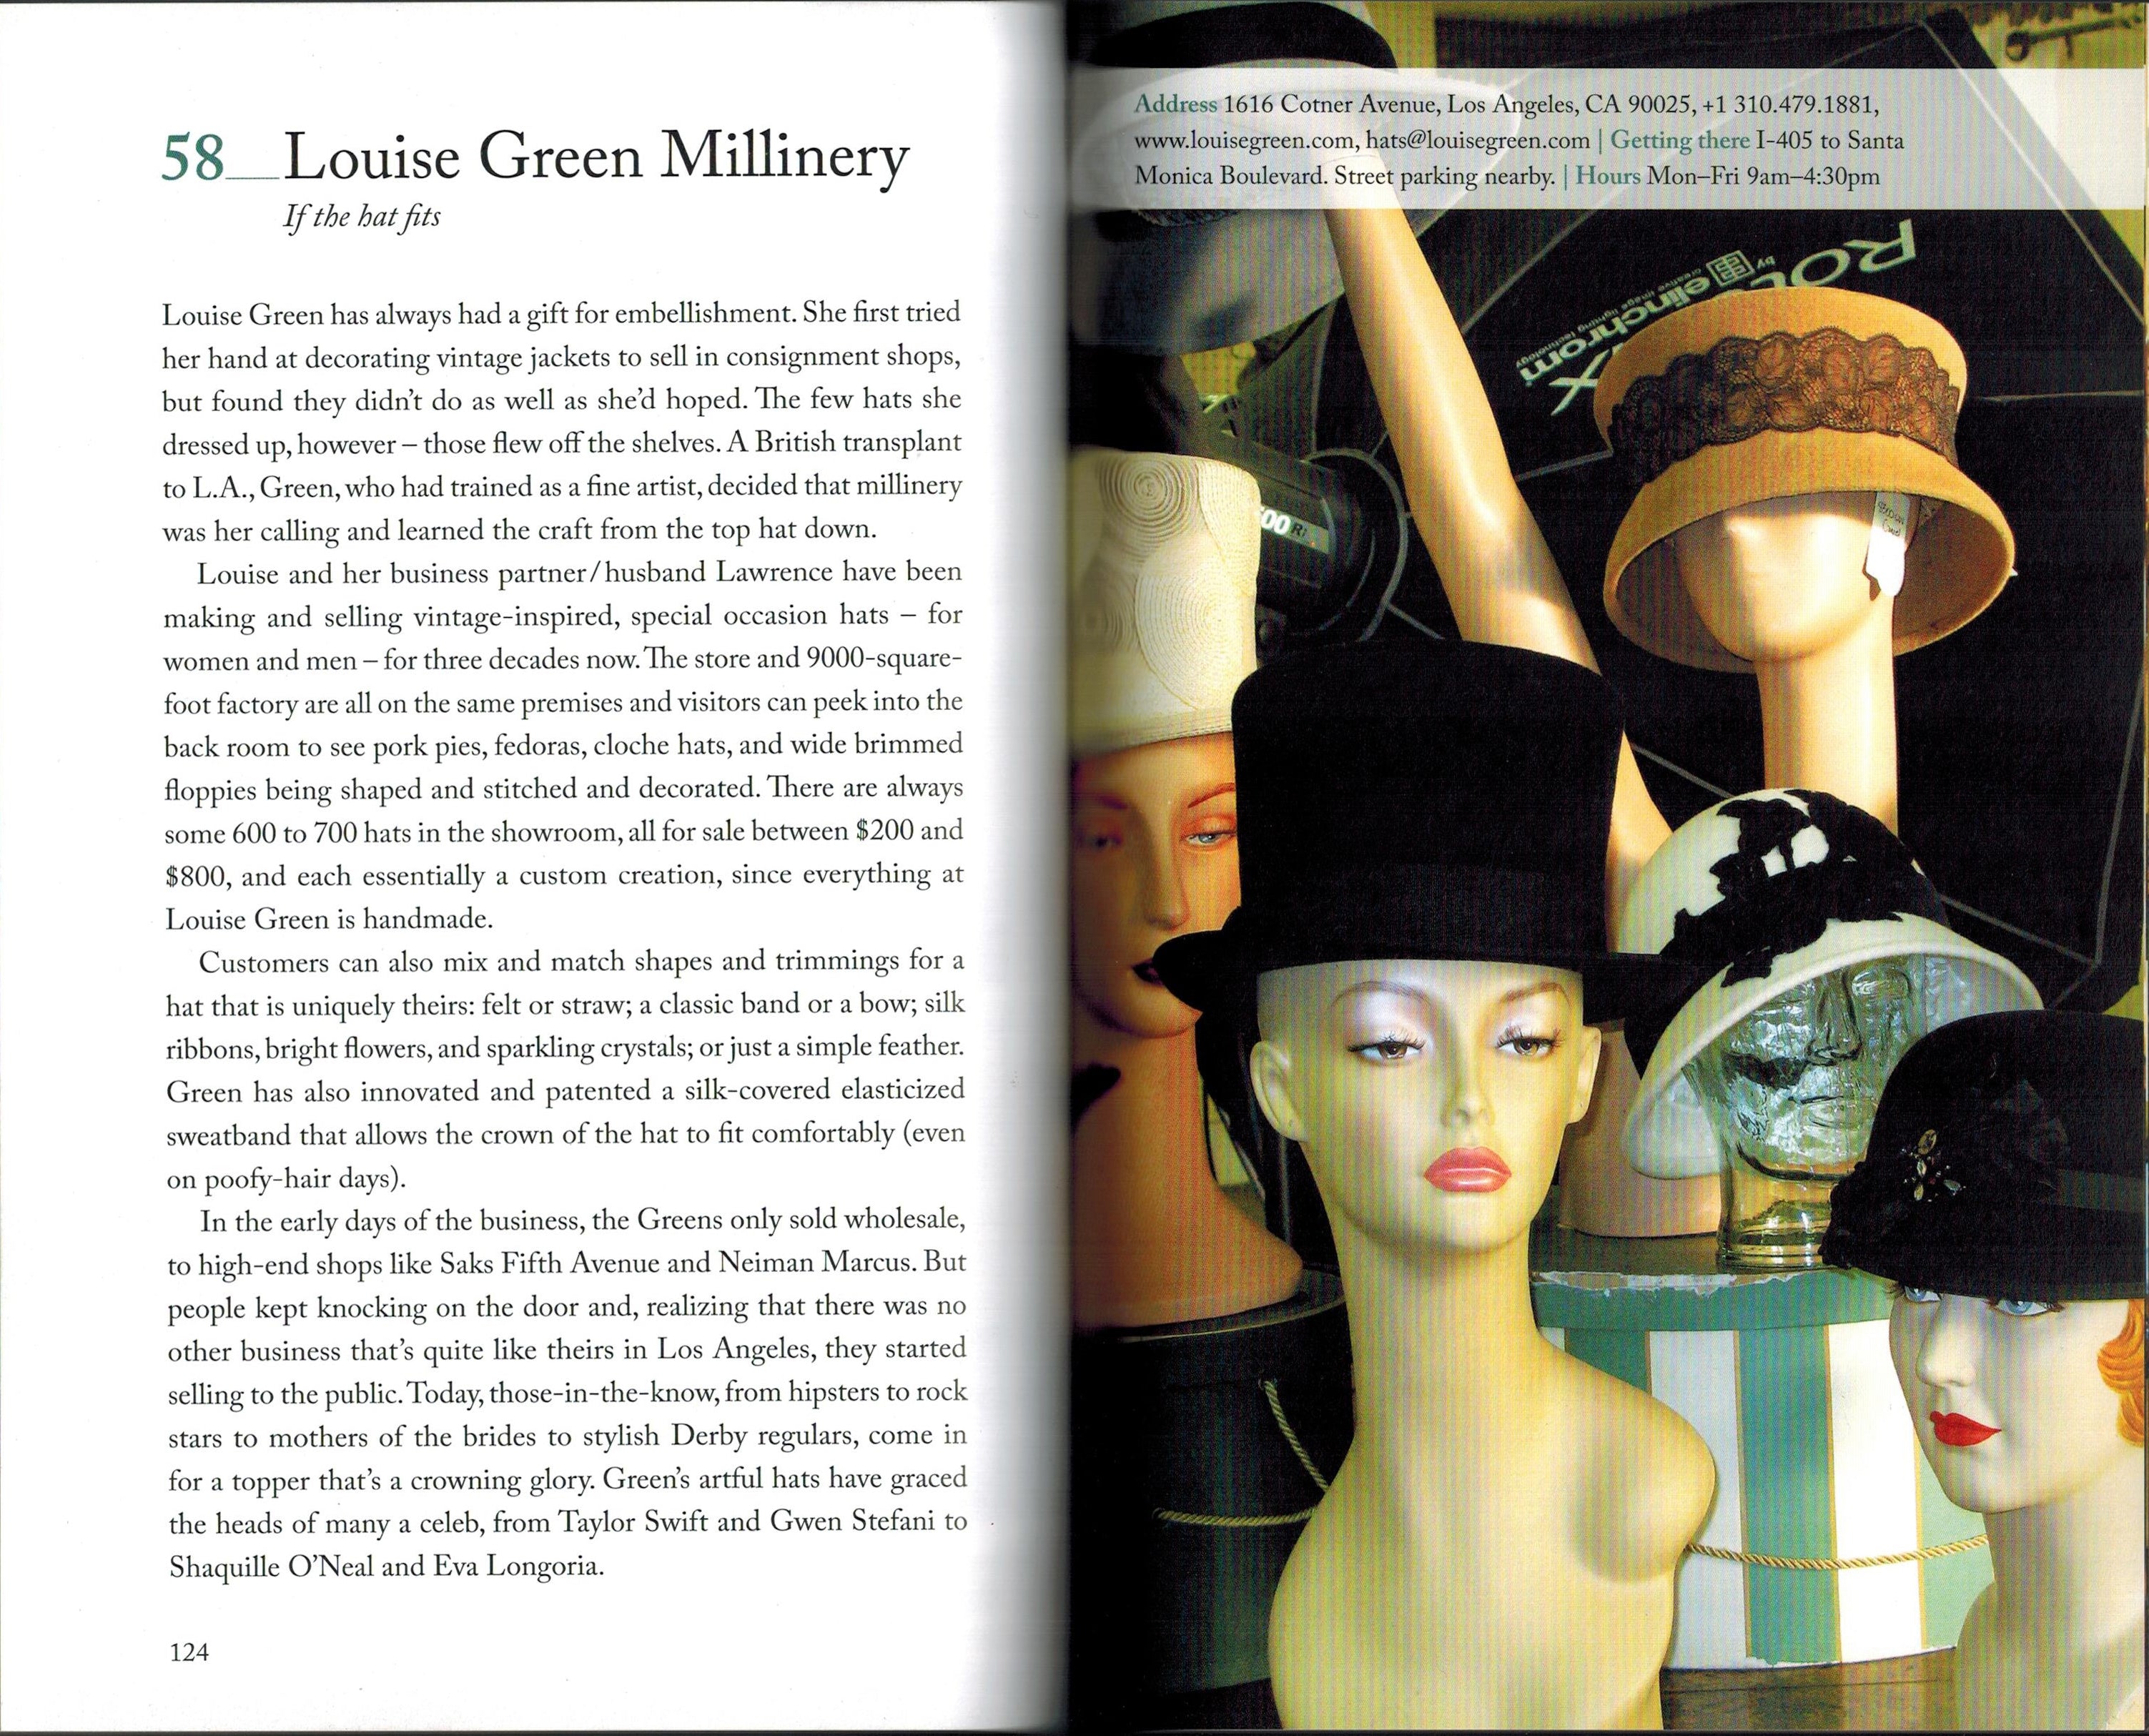 Louise Green Millinery - Los Angeles Times